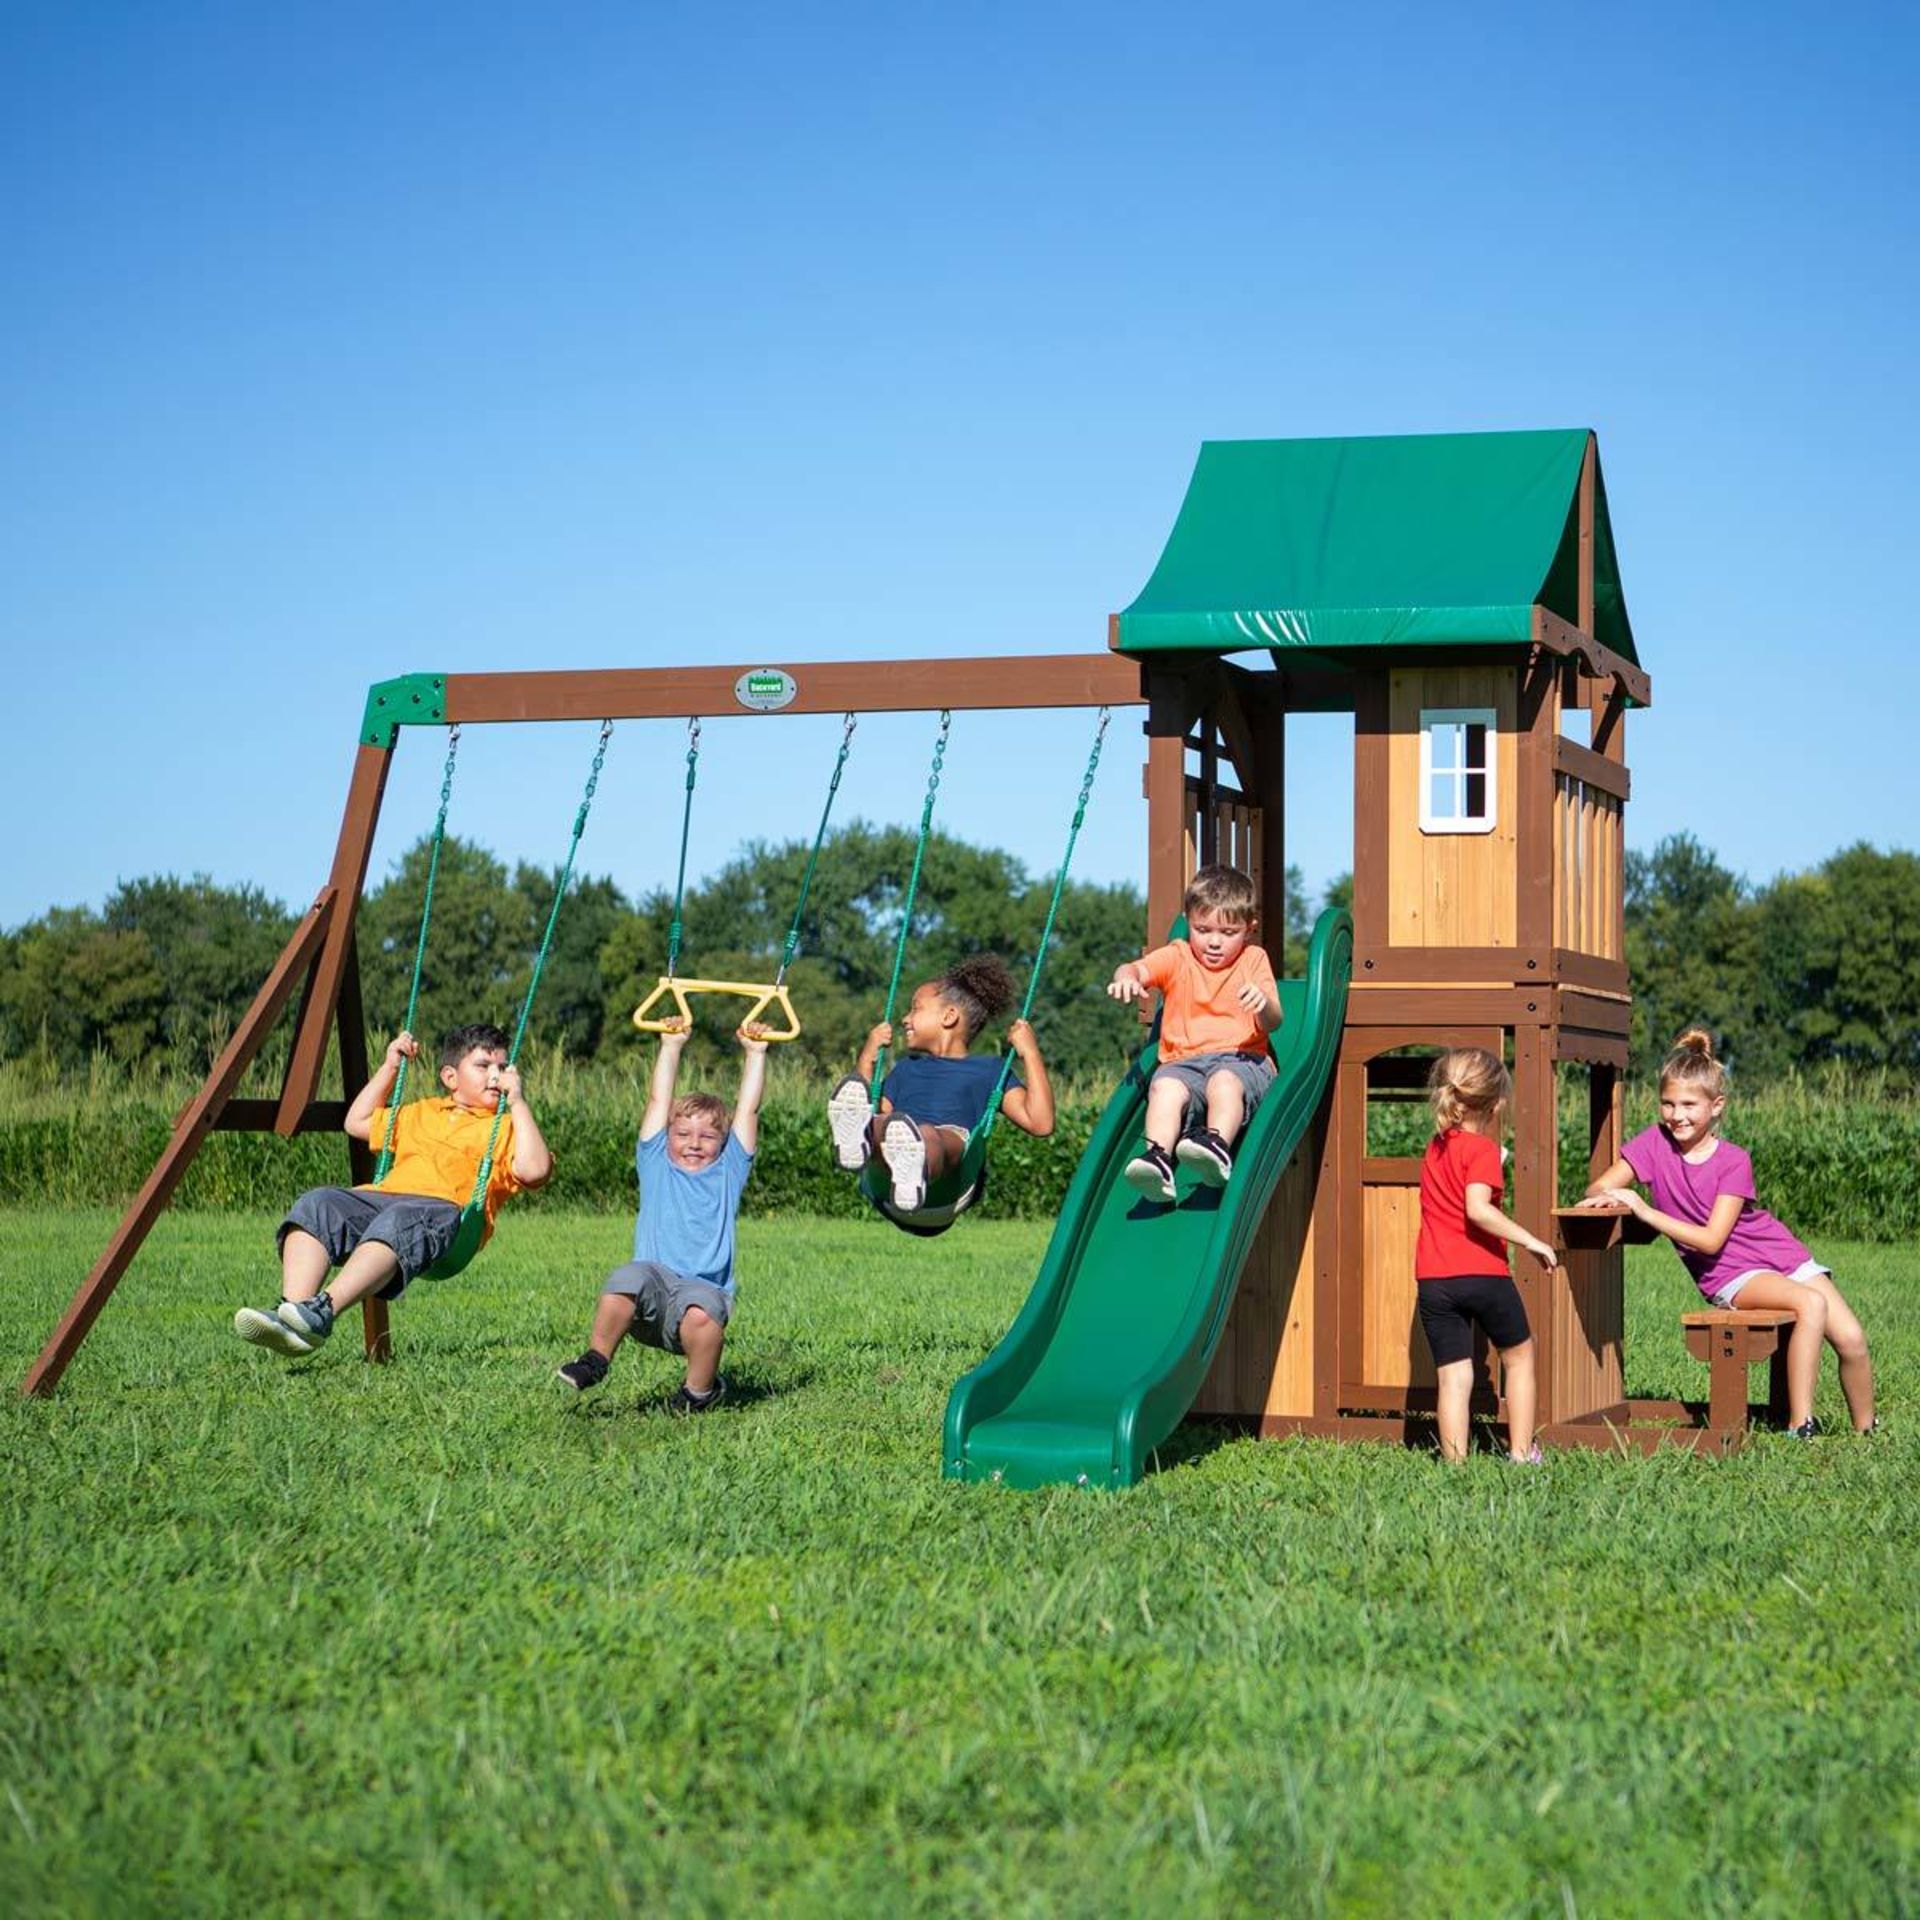 1 BACKYARD DISCOVERY LAKEWOOD SWING SET PLAYCENTRE (2-10 YEARS) RRP Â£549 (PICTURES FOR ILLUSTRATION